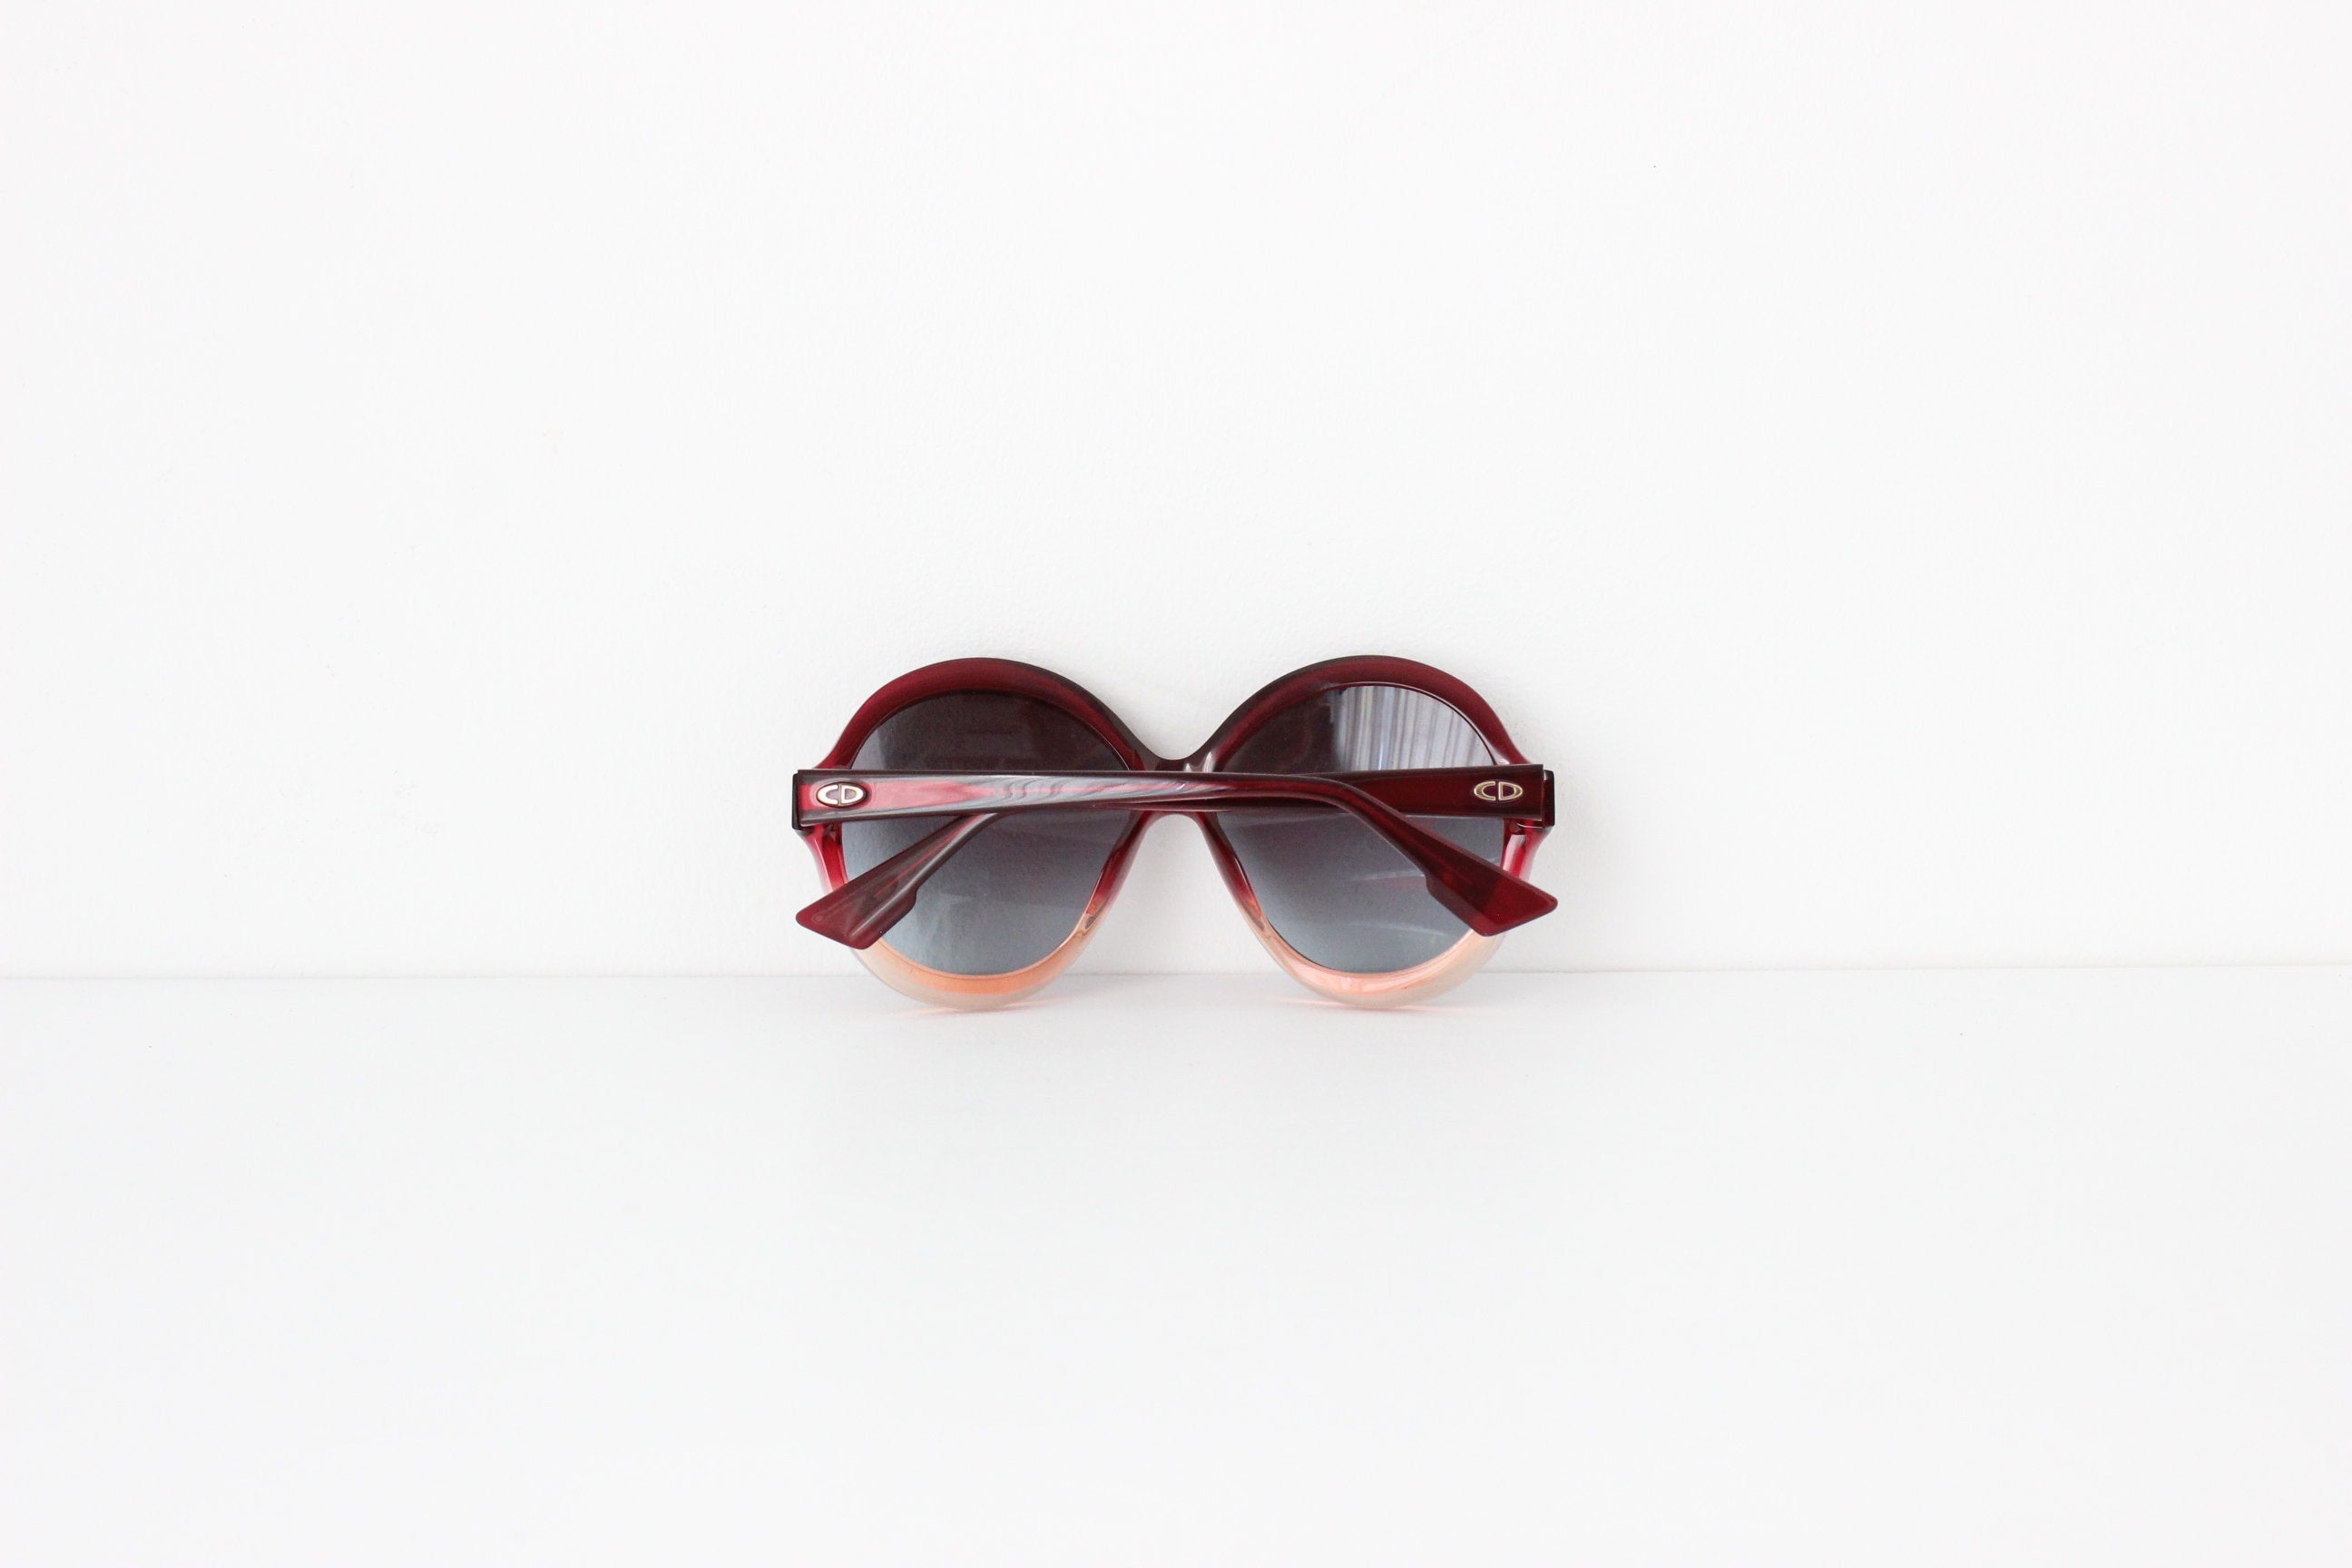 CHRISTIAN DIOR Luxe Oversized Vintage Sunglasses